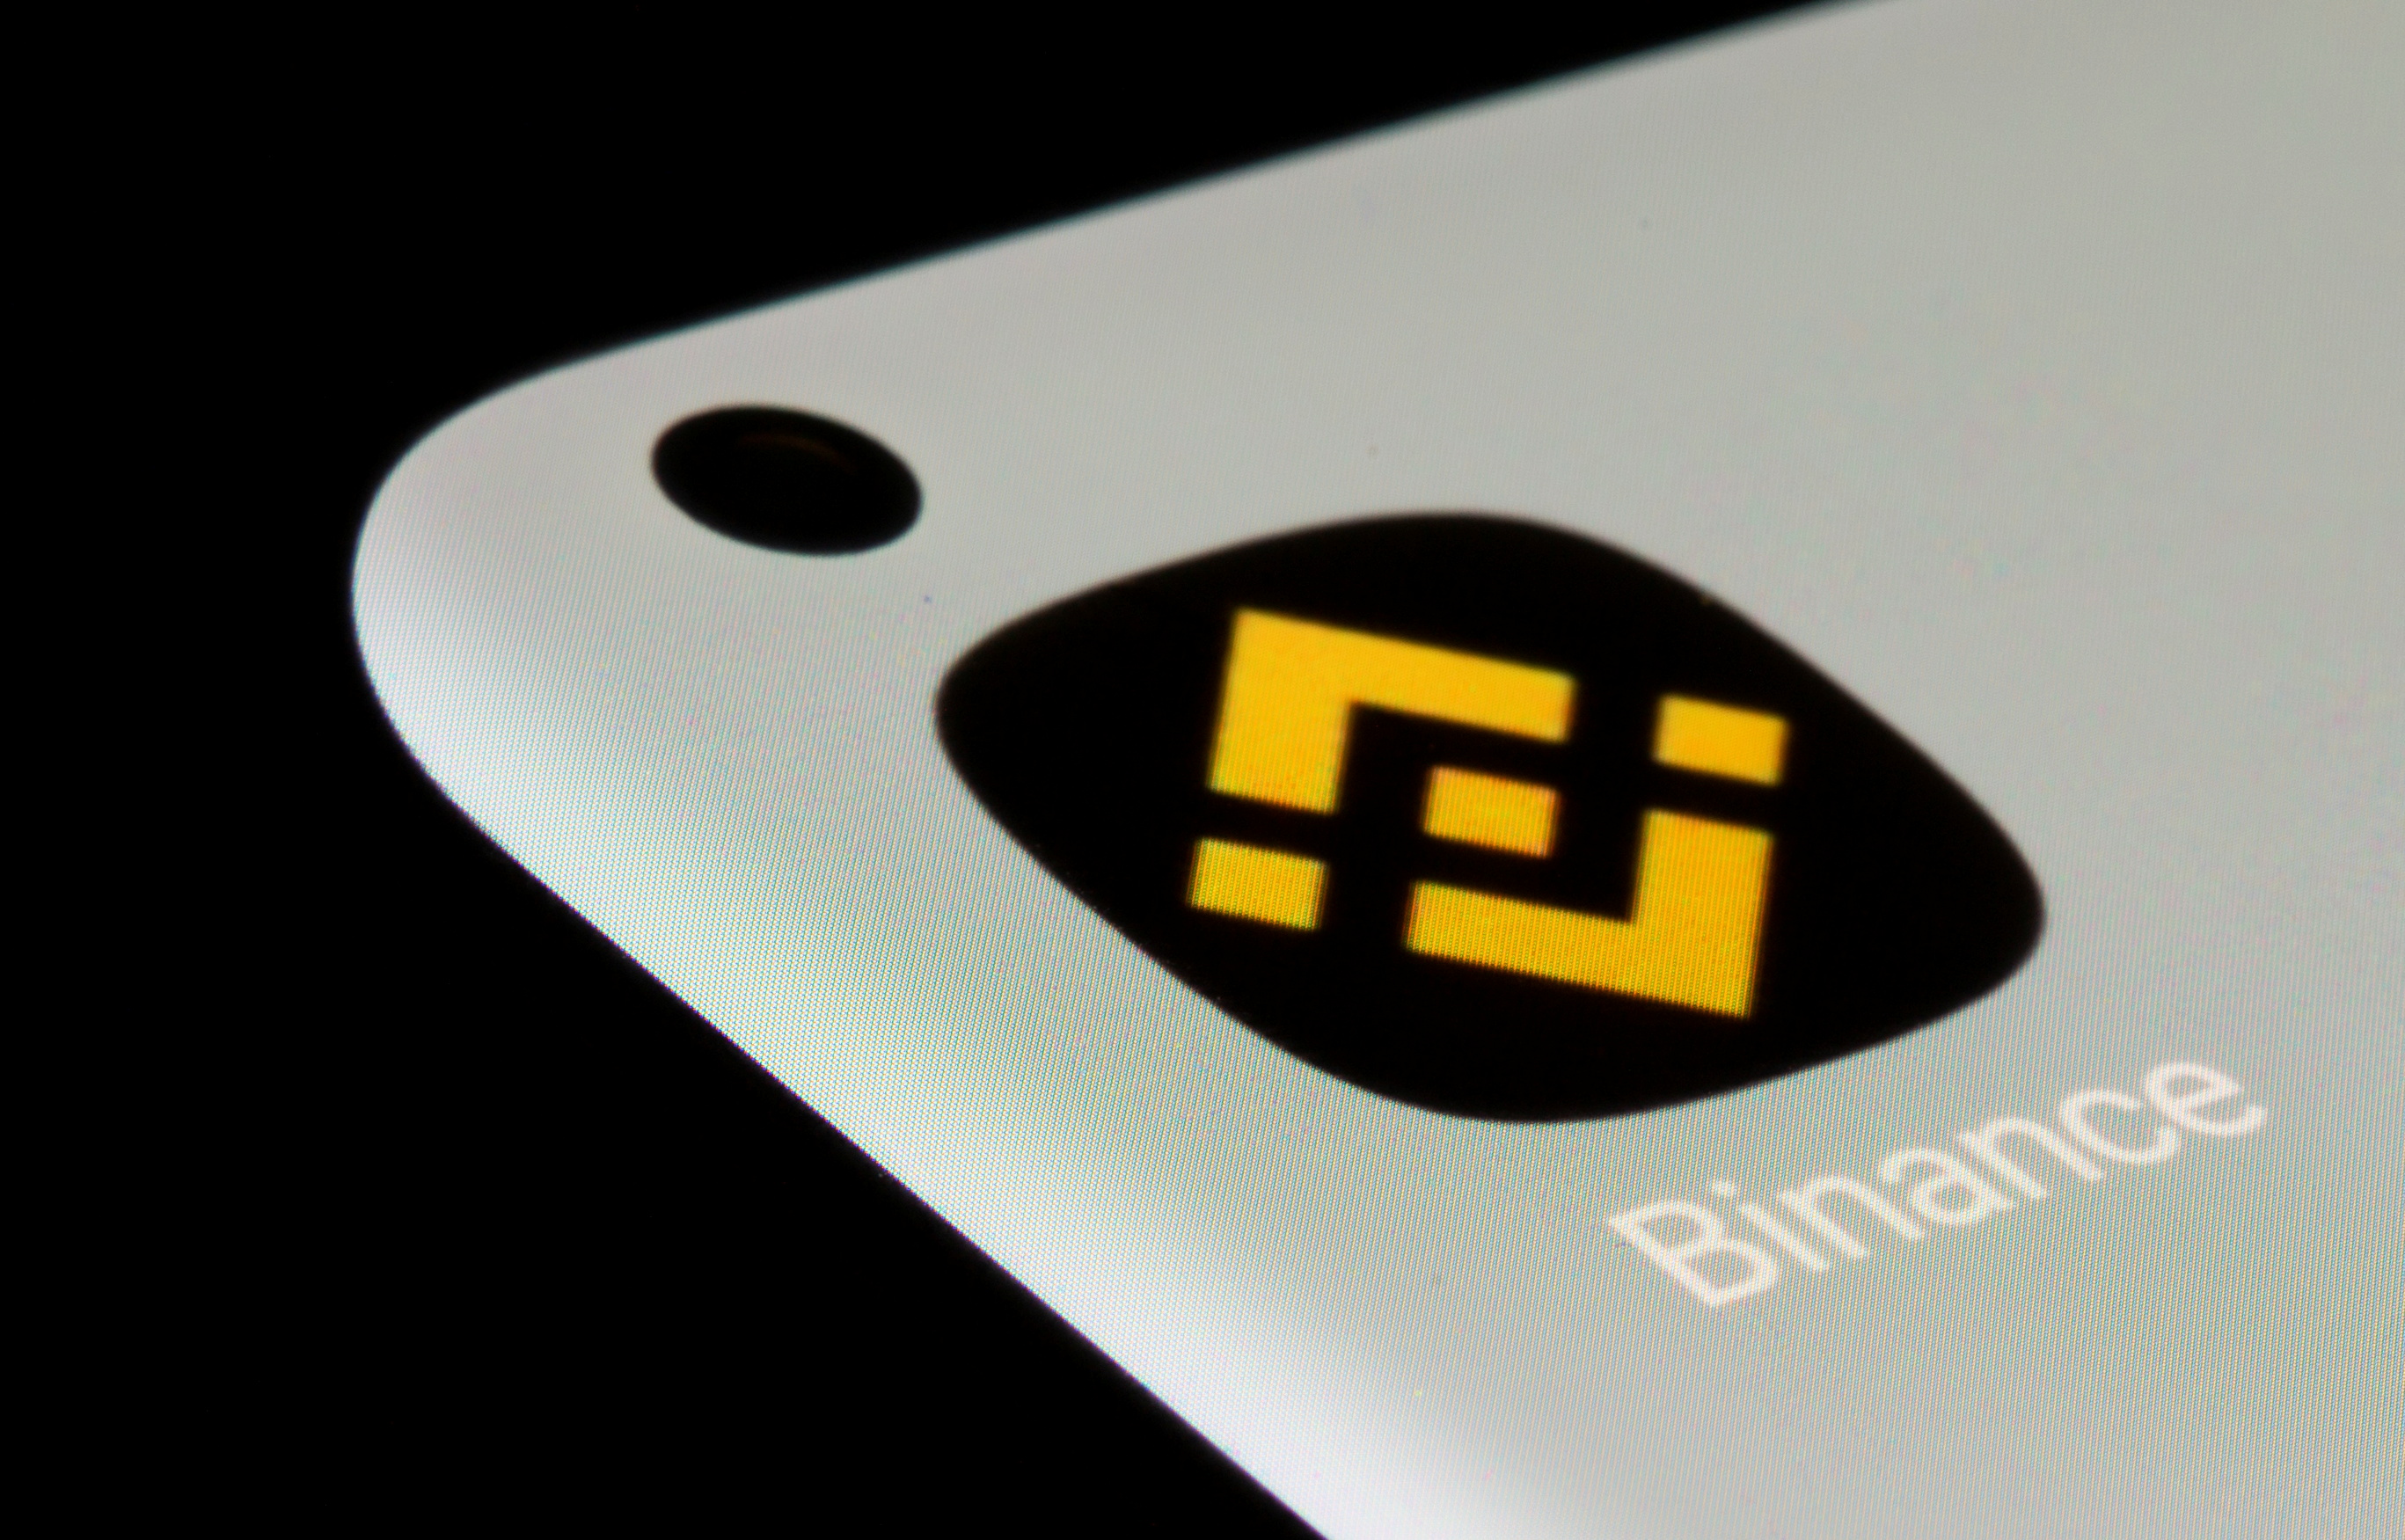 Binance app is seen on a smartphone in this illustration